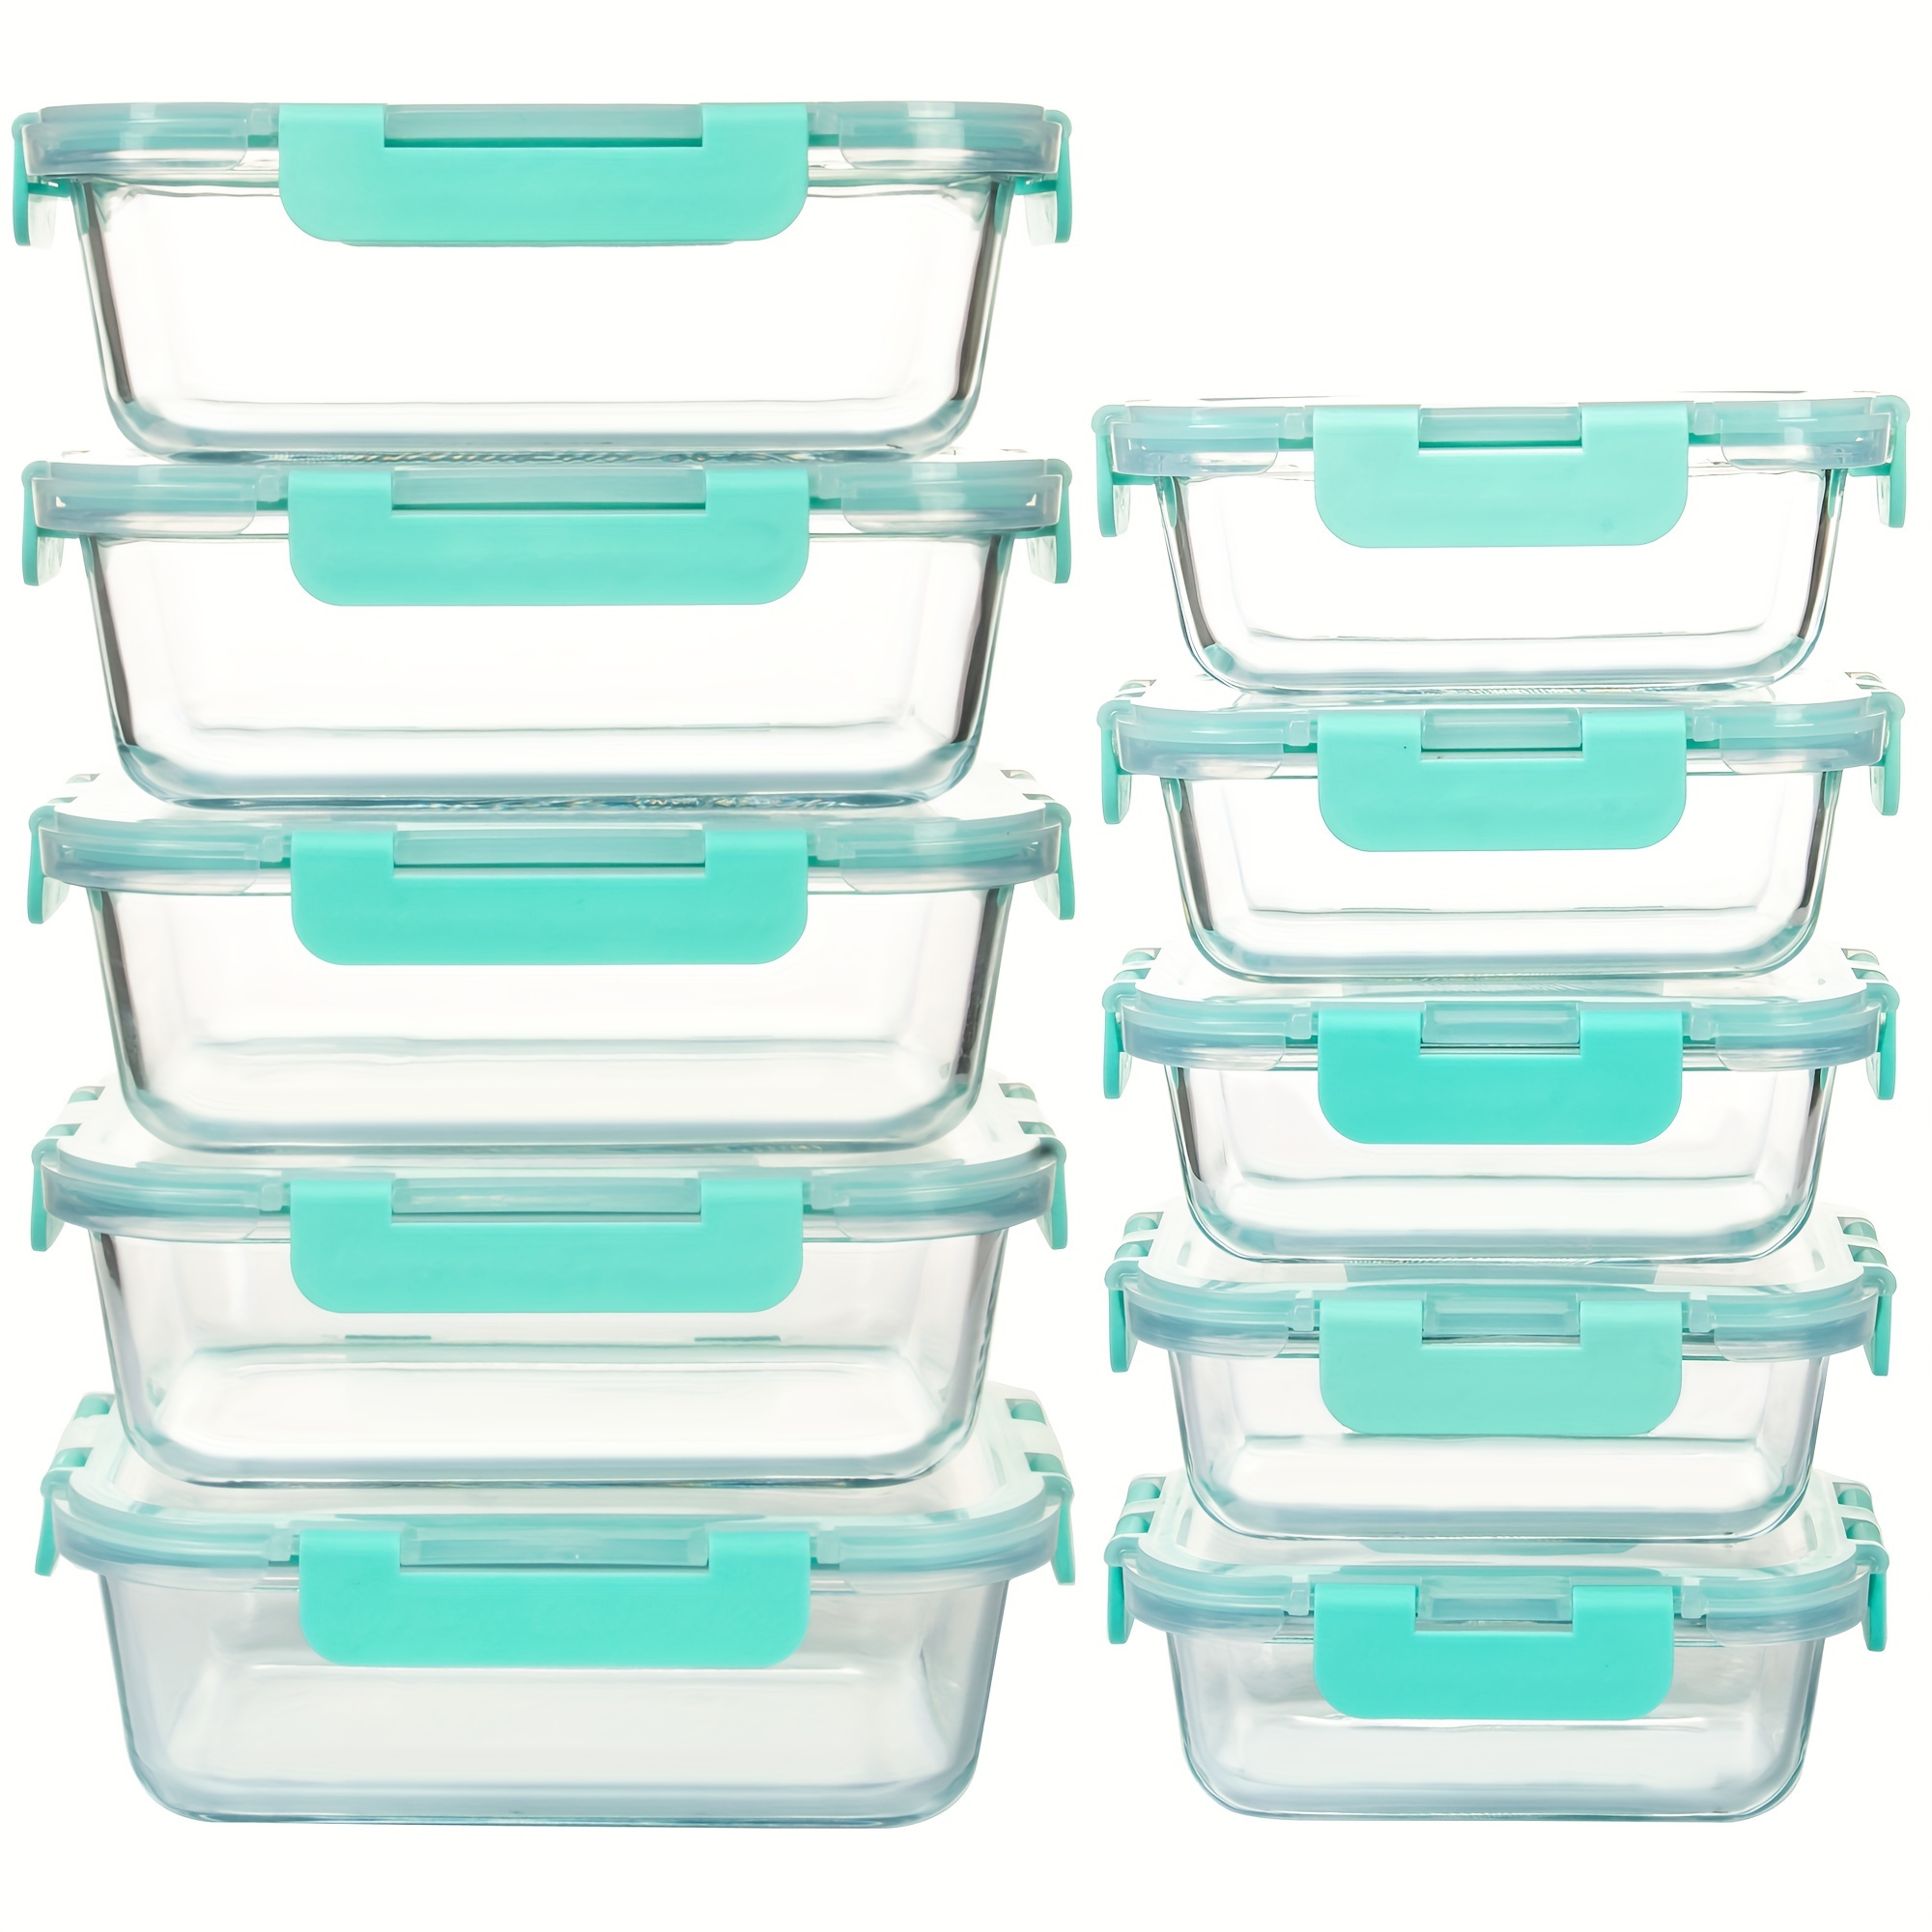 

[10-pack] High Borosilicate Glass Meal Prep Containers Set, Food Storage Containers With Airtight Leakproof Lids, For Home Kitchen Office Lunch Restaurant